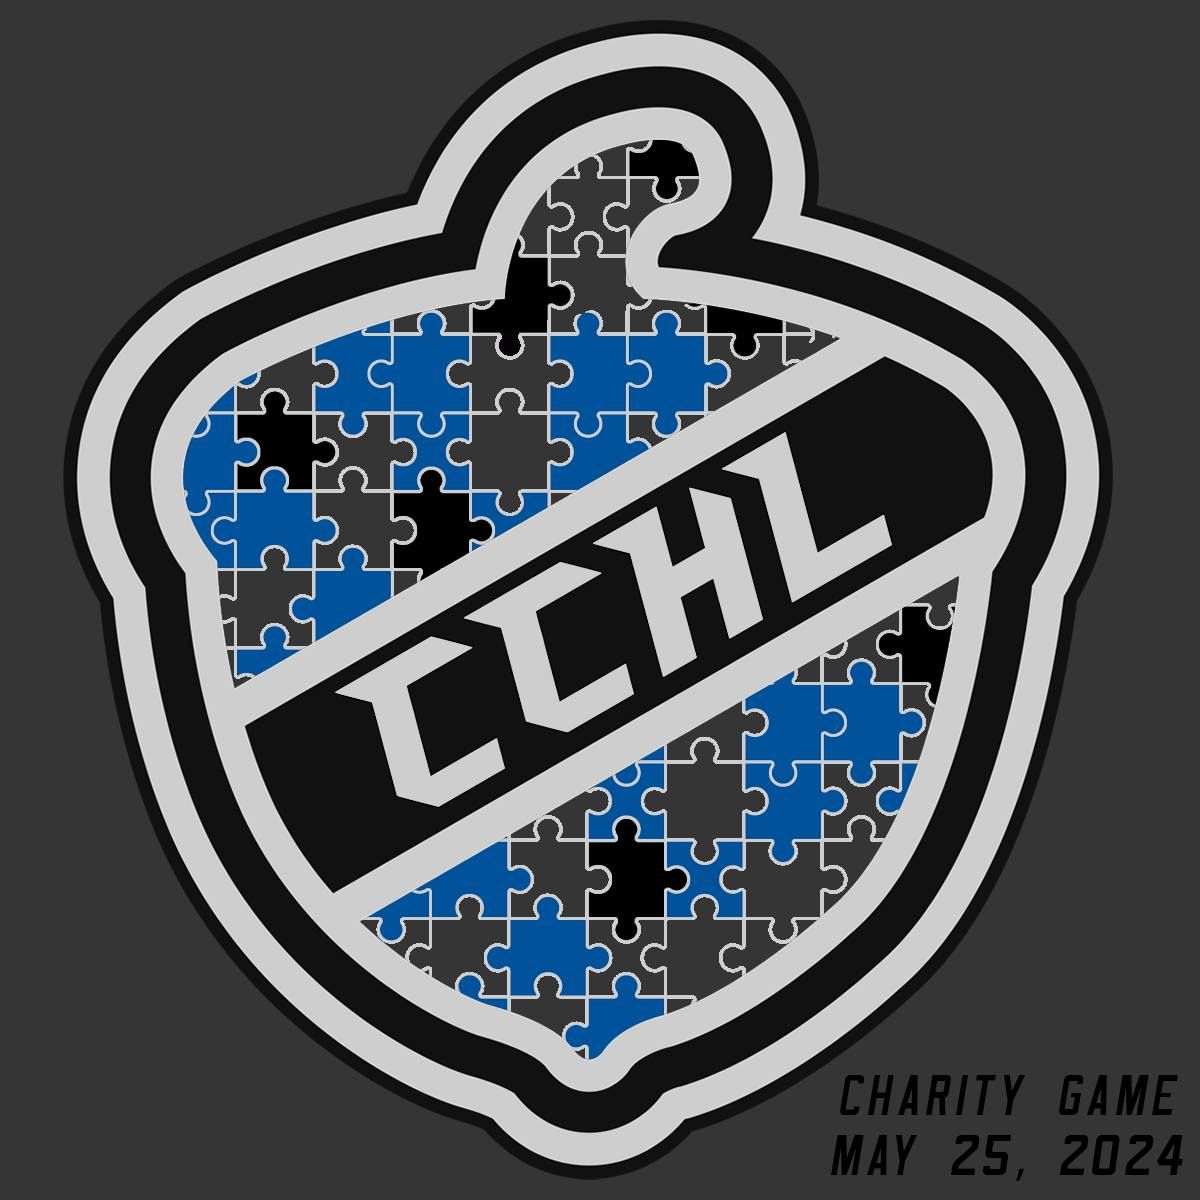 CCHL Charity game to benefit Triangle Special Hockey and the Raleigh TEACCH Center 